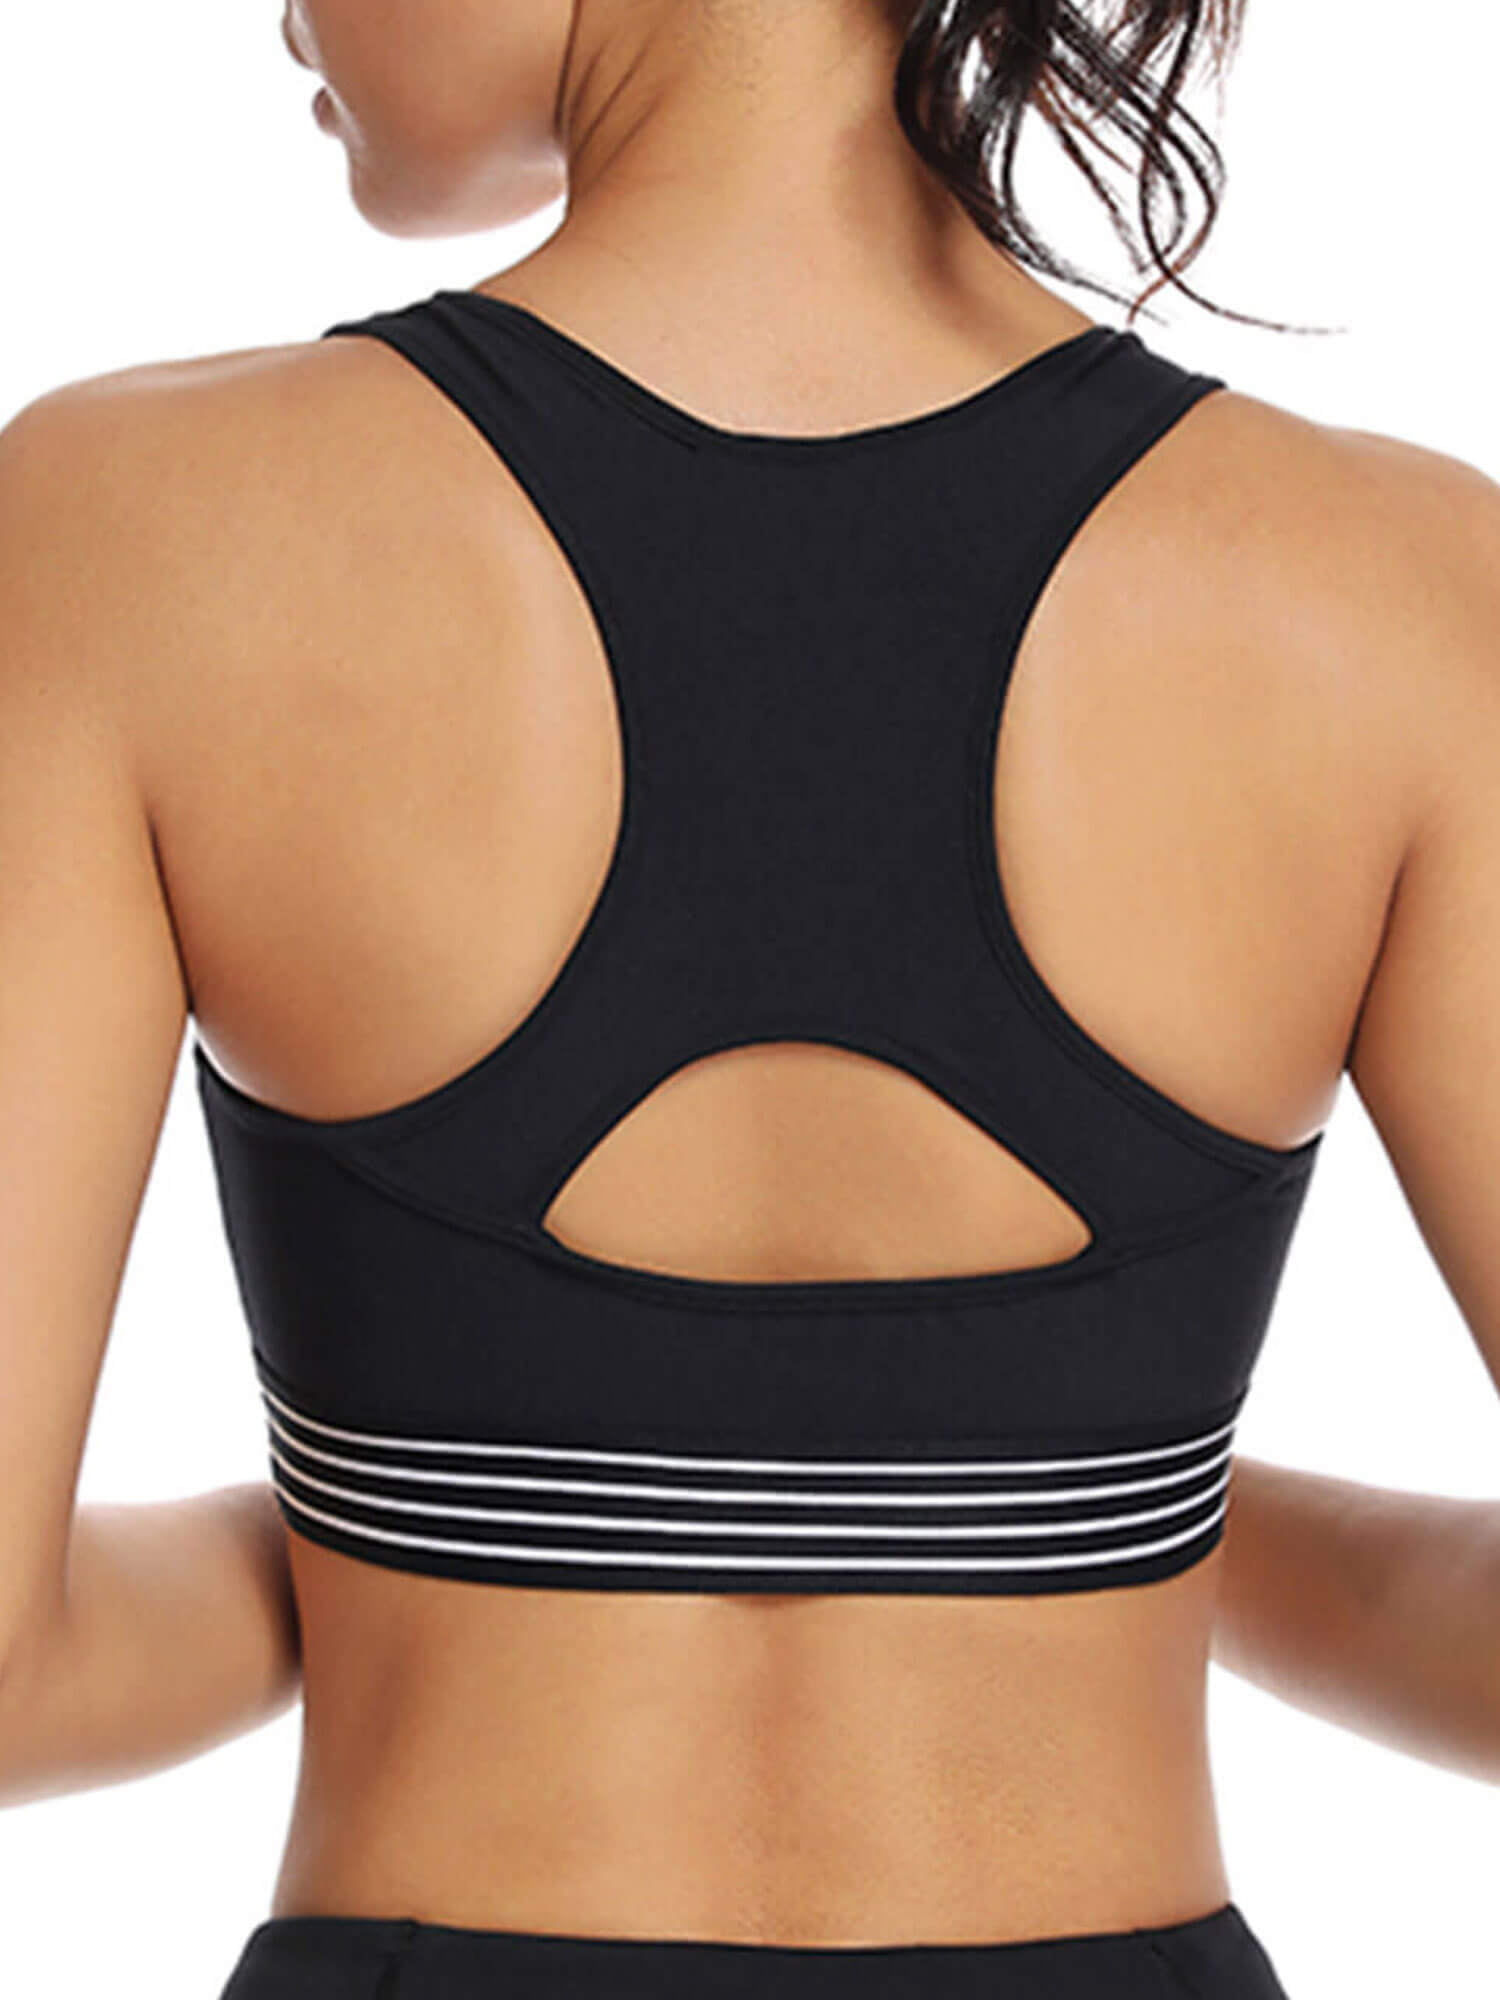 Padded Athletic Yoga Bra AS ROSE RICH Strappy Sports Bra for Women Women Workout Tops with Removable Cups 